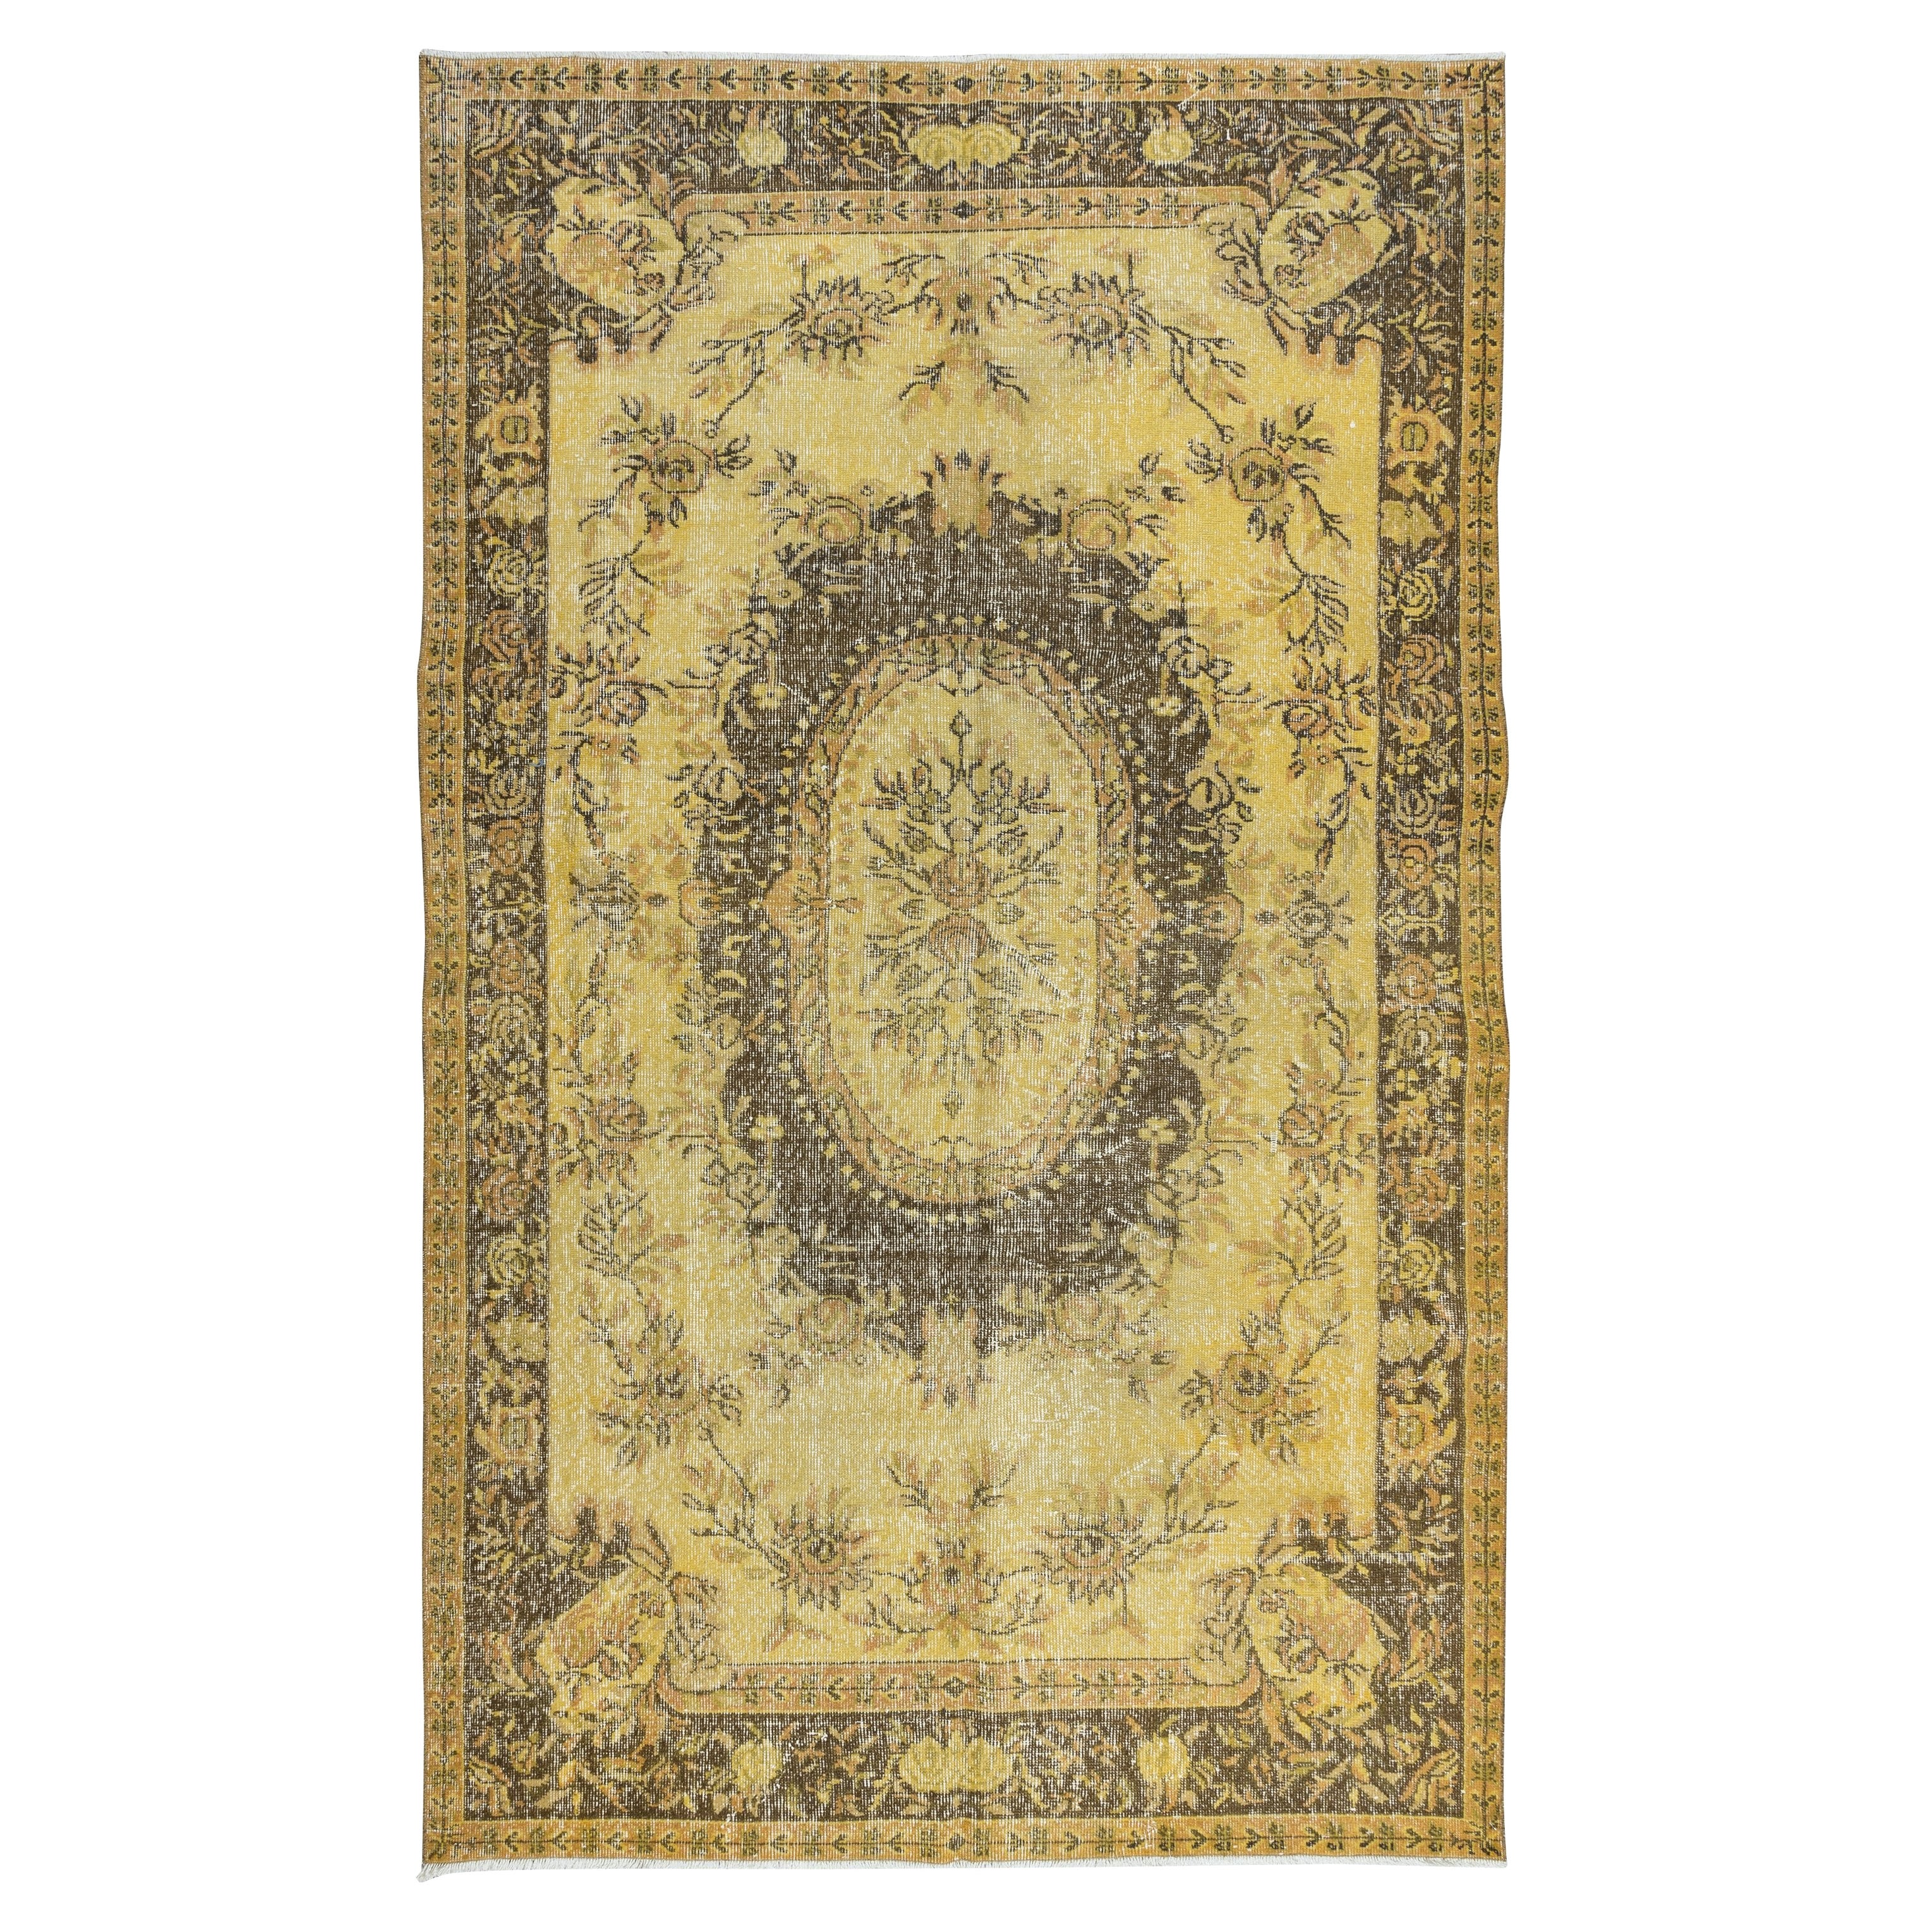 5.8x9.6 Ft Classic Aubusson Inspired Handmade Turkish Rug in Soft Yellow & Brown